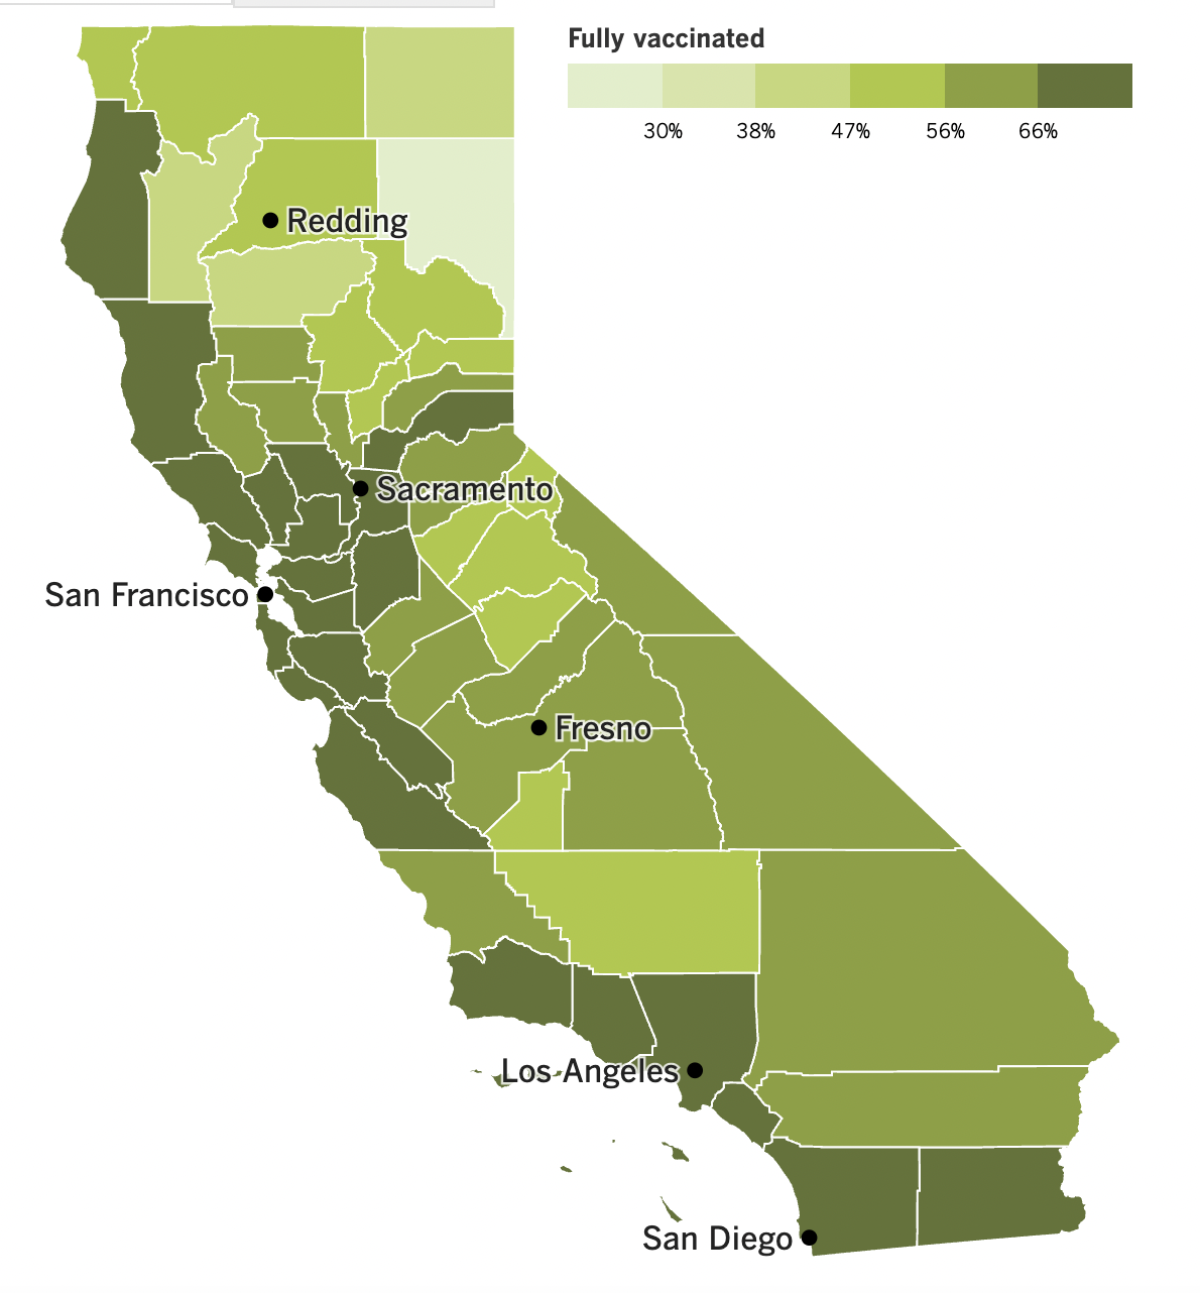 A map showing California's COVID-19 vaccination progress by county as of Dec. 13, 2022.